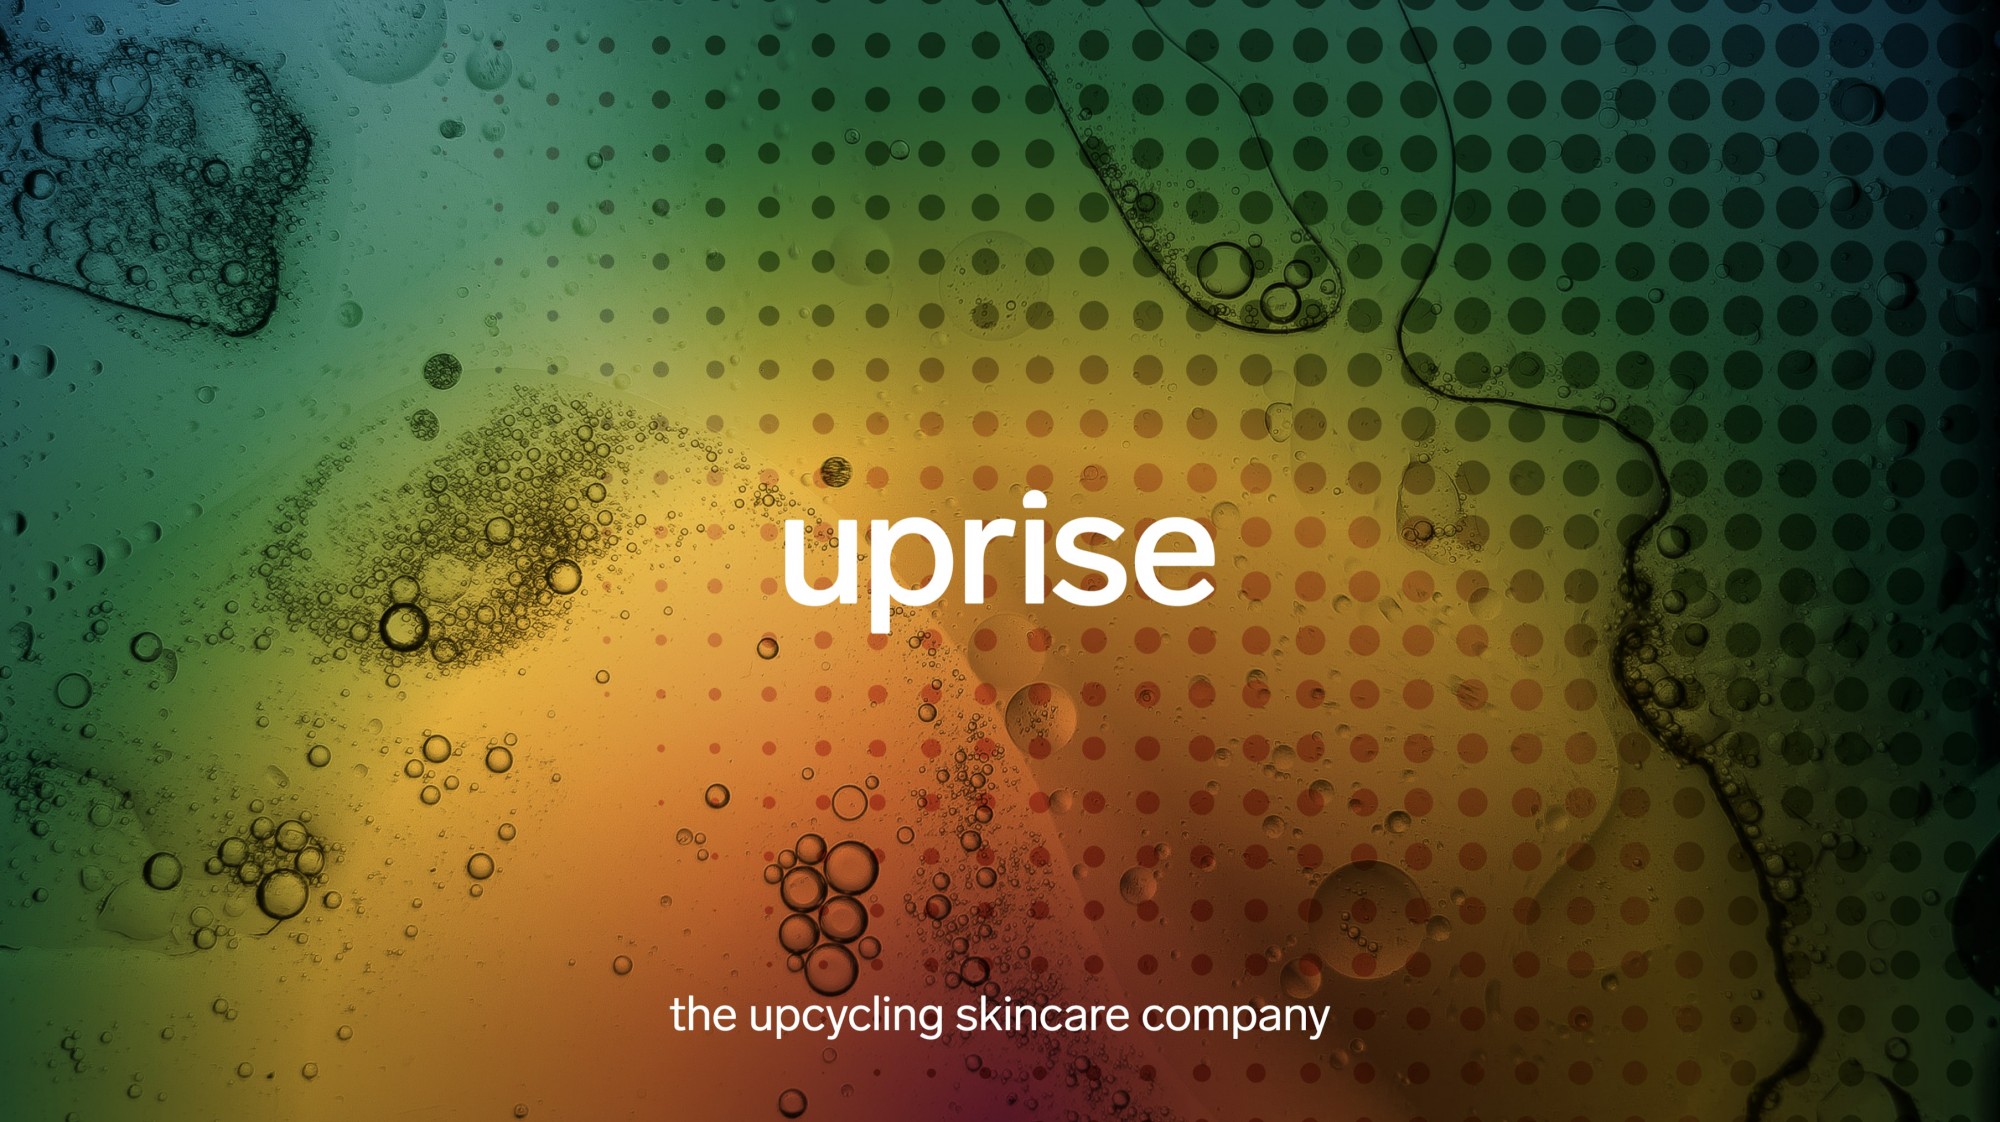 uprise - coming soon